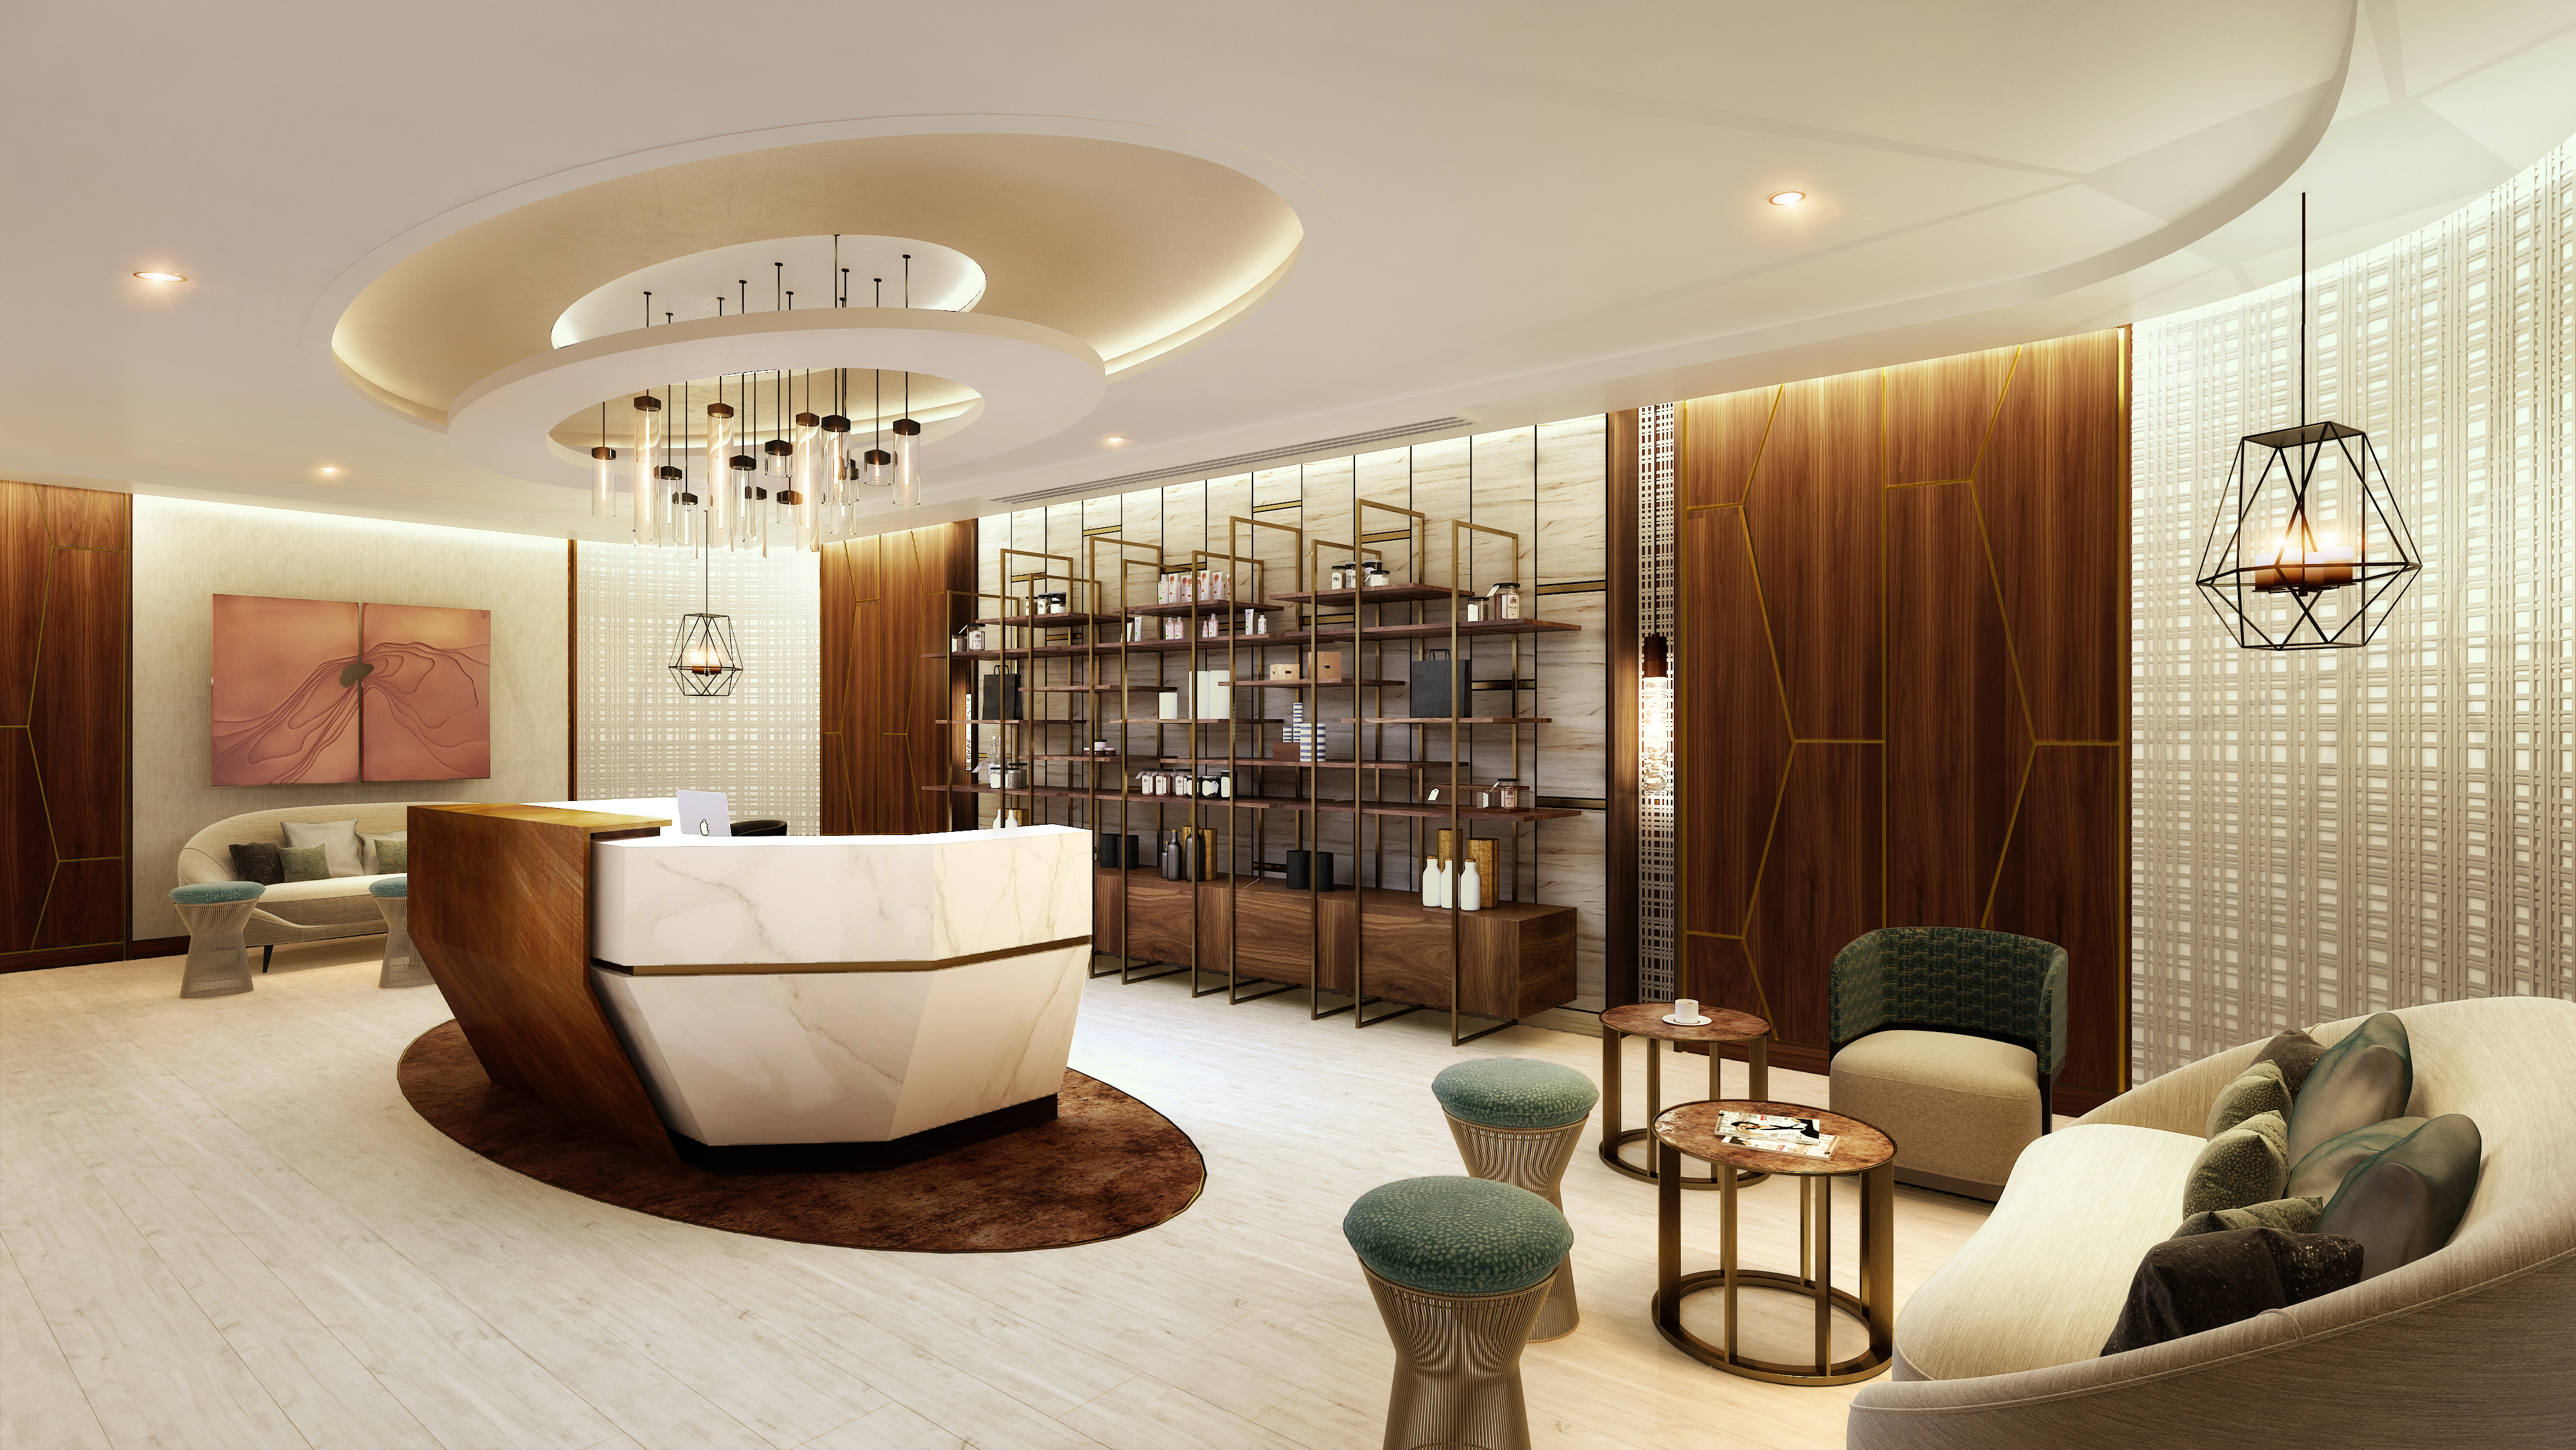 Areen Design's International Expansion Continues With New Hotel Project